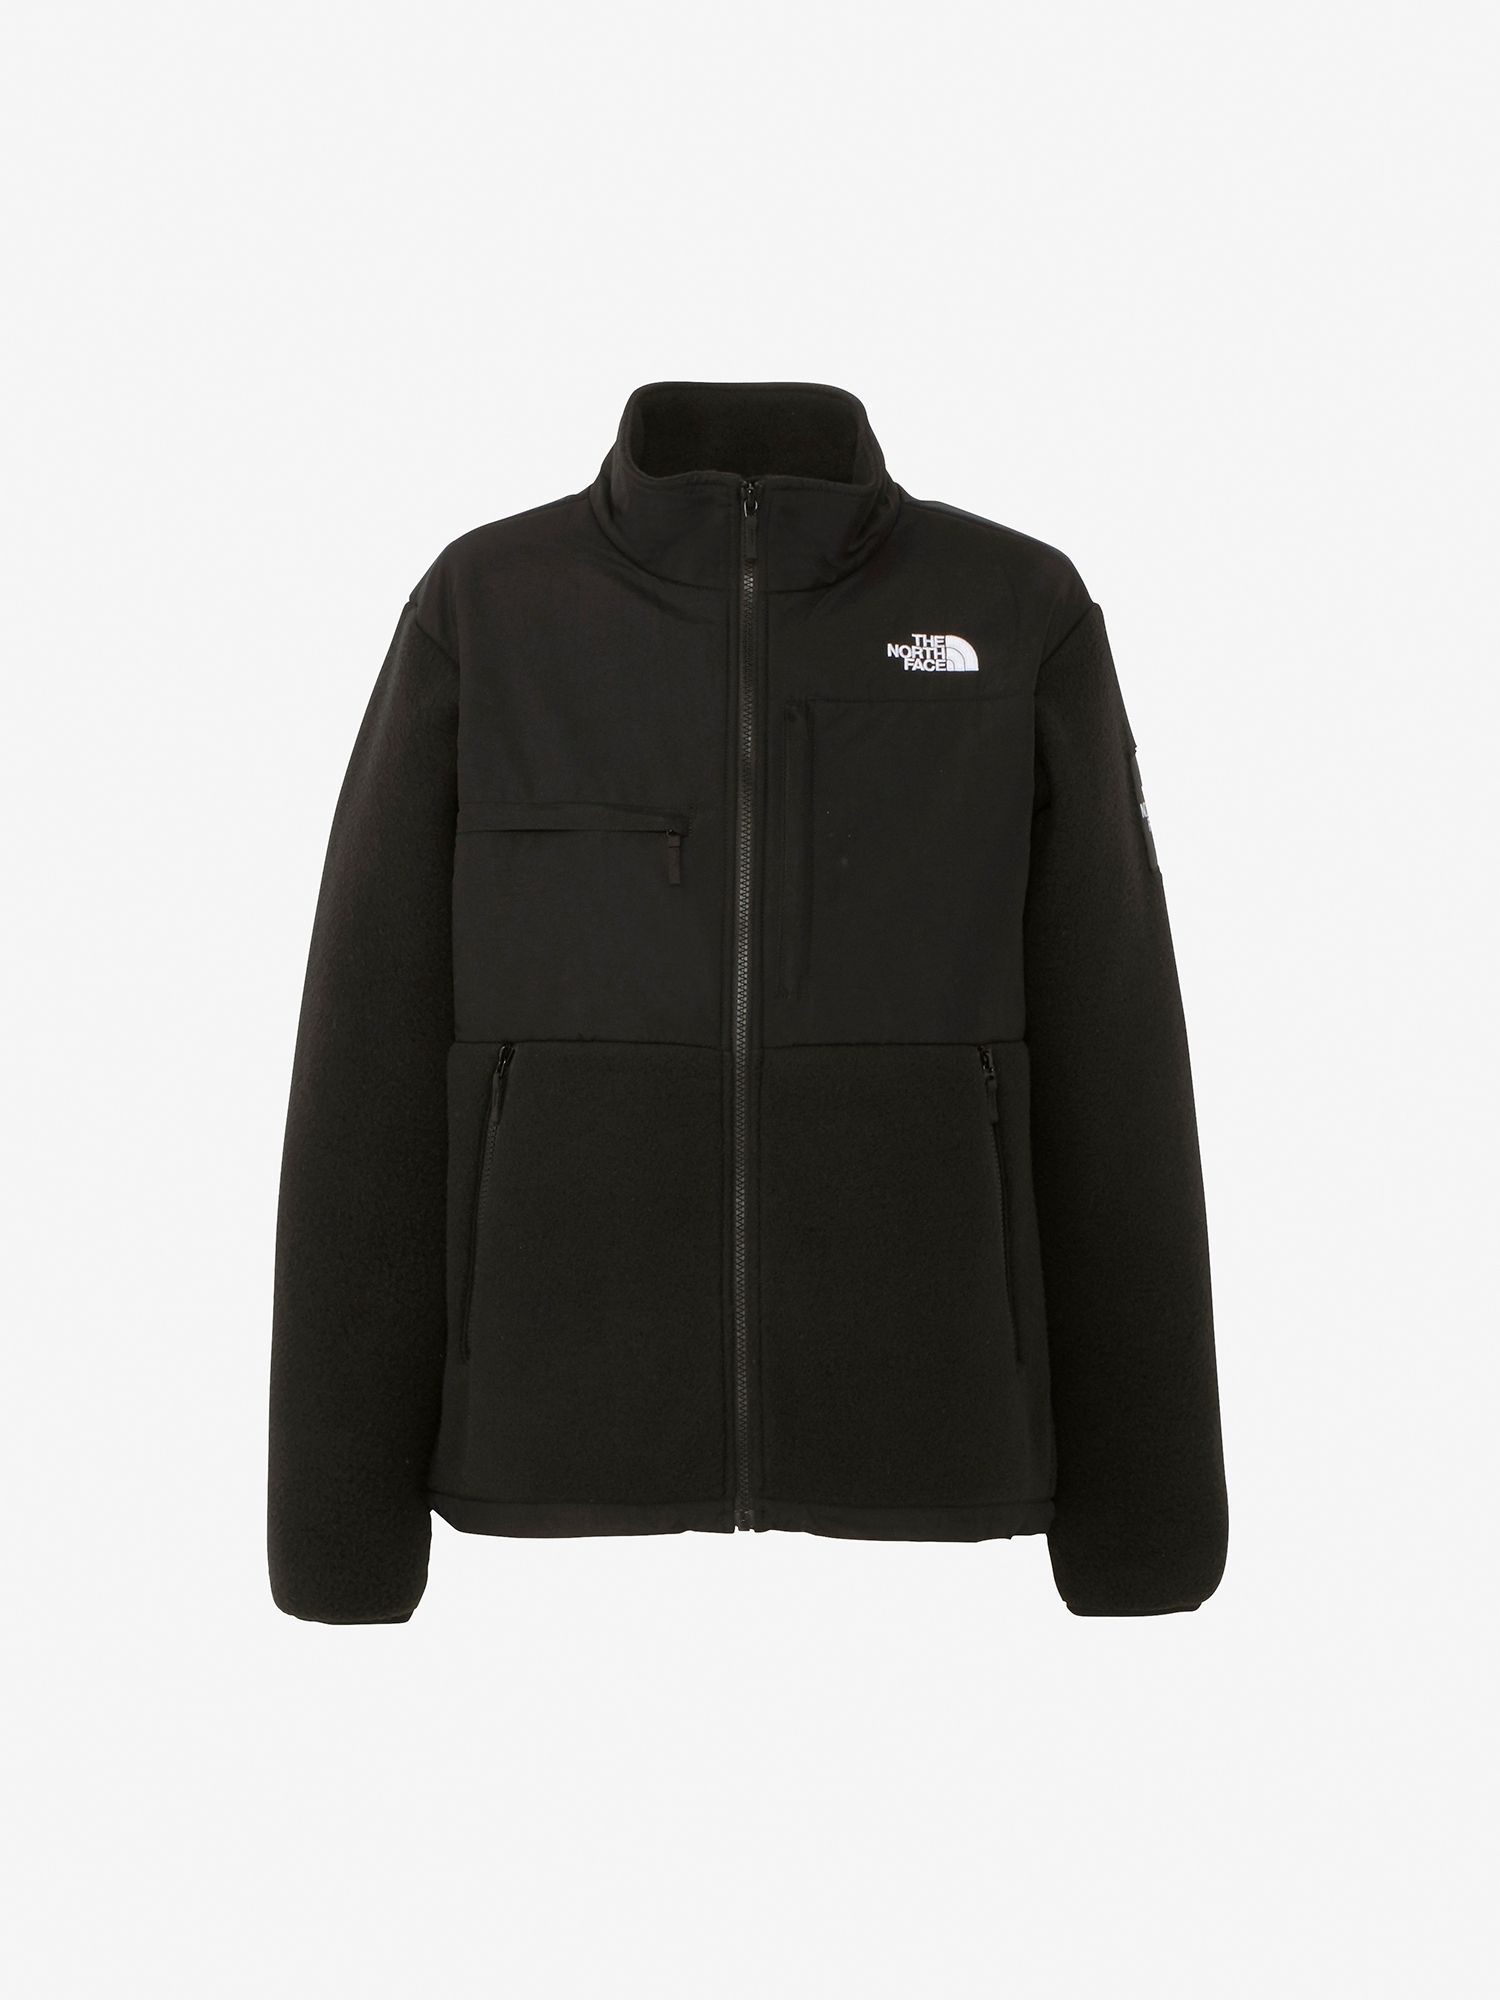 THE NORTH FACE デナリジャケット-eastgate.mk